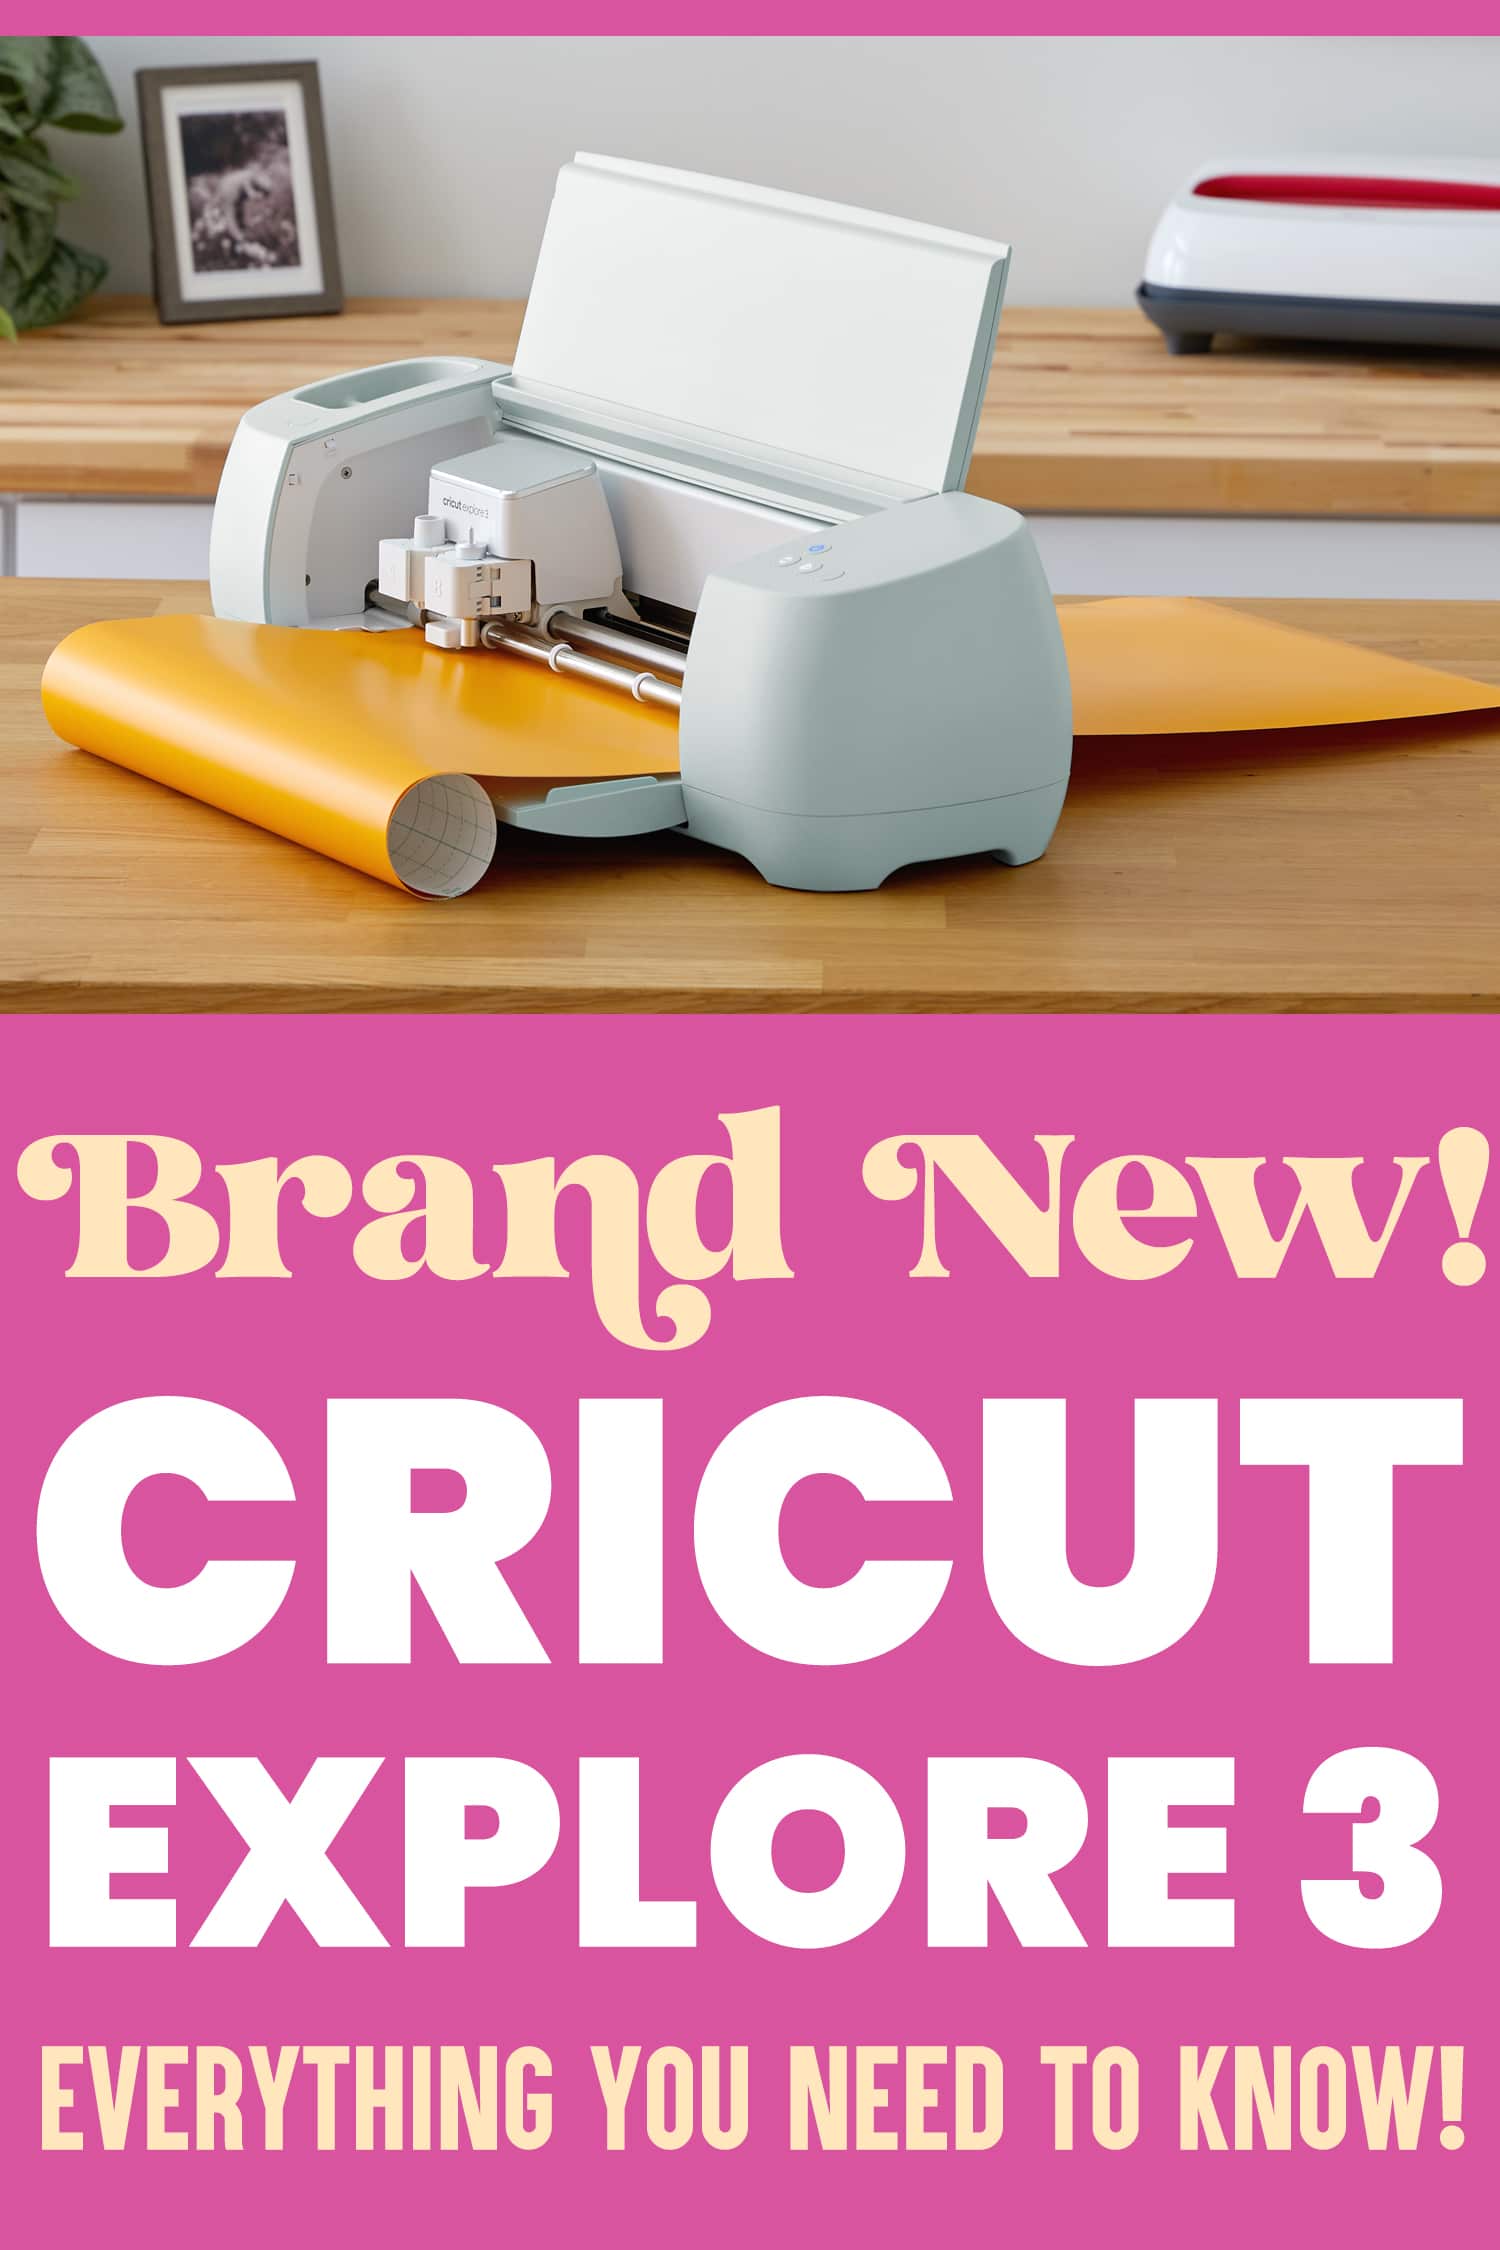 Cricut Explore 3: Everything You Need to Know!